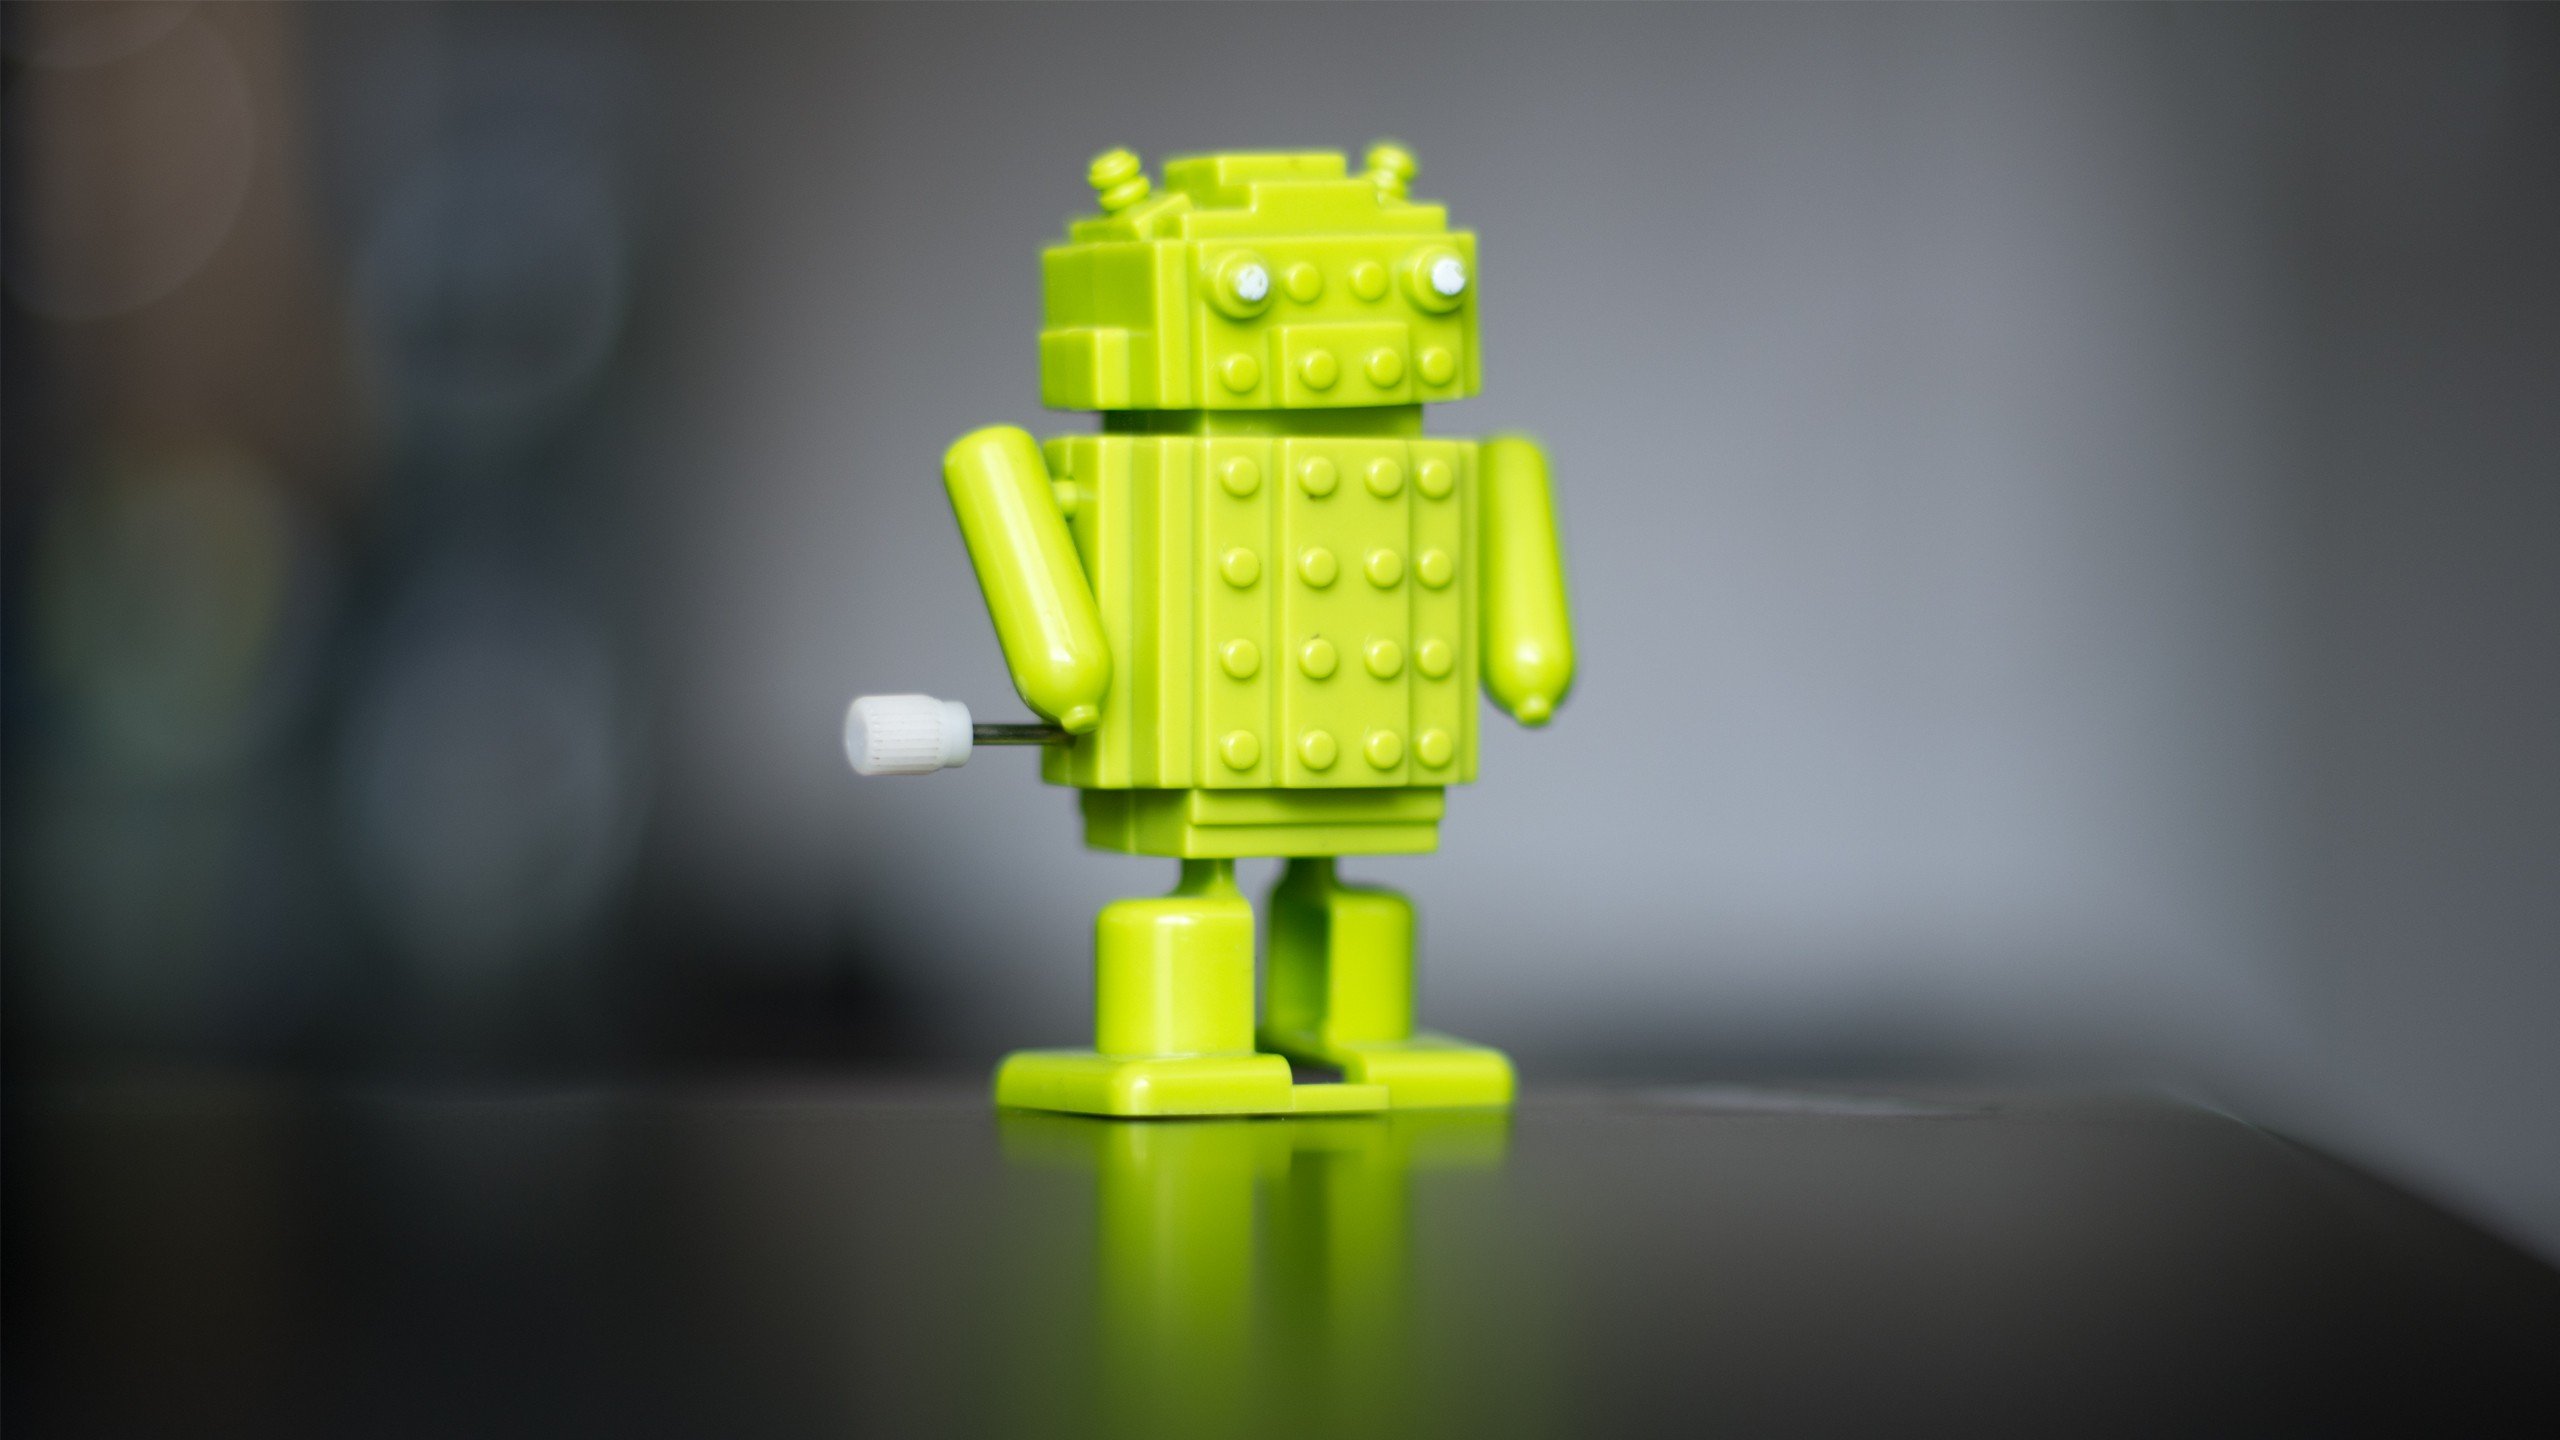 Android (operating system), Robot, Bokeh, Blurred, Technology Wallpaper